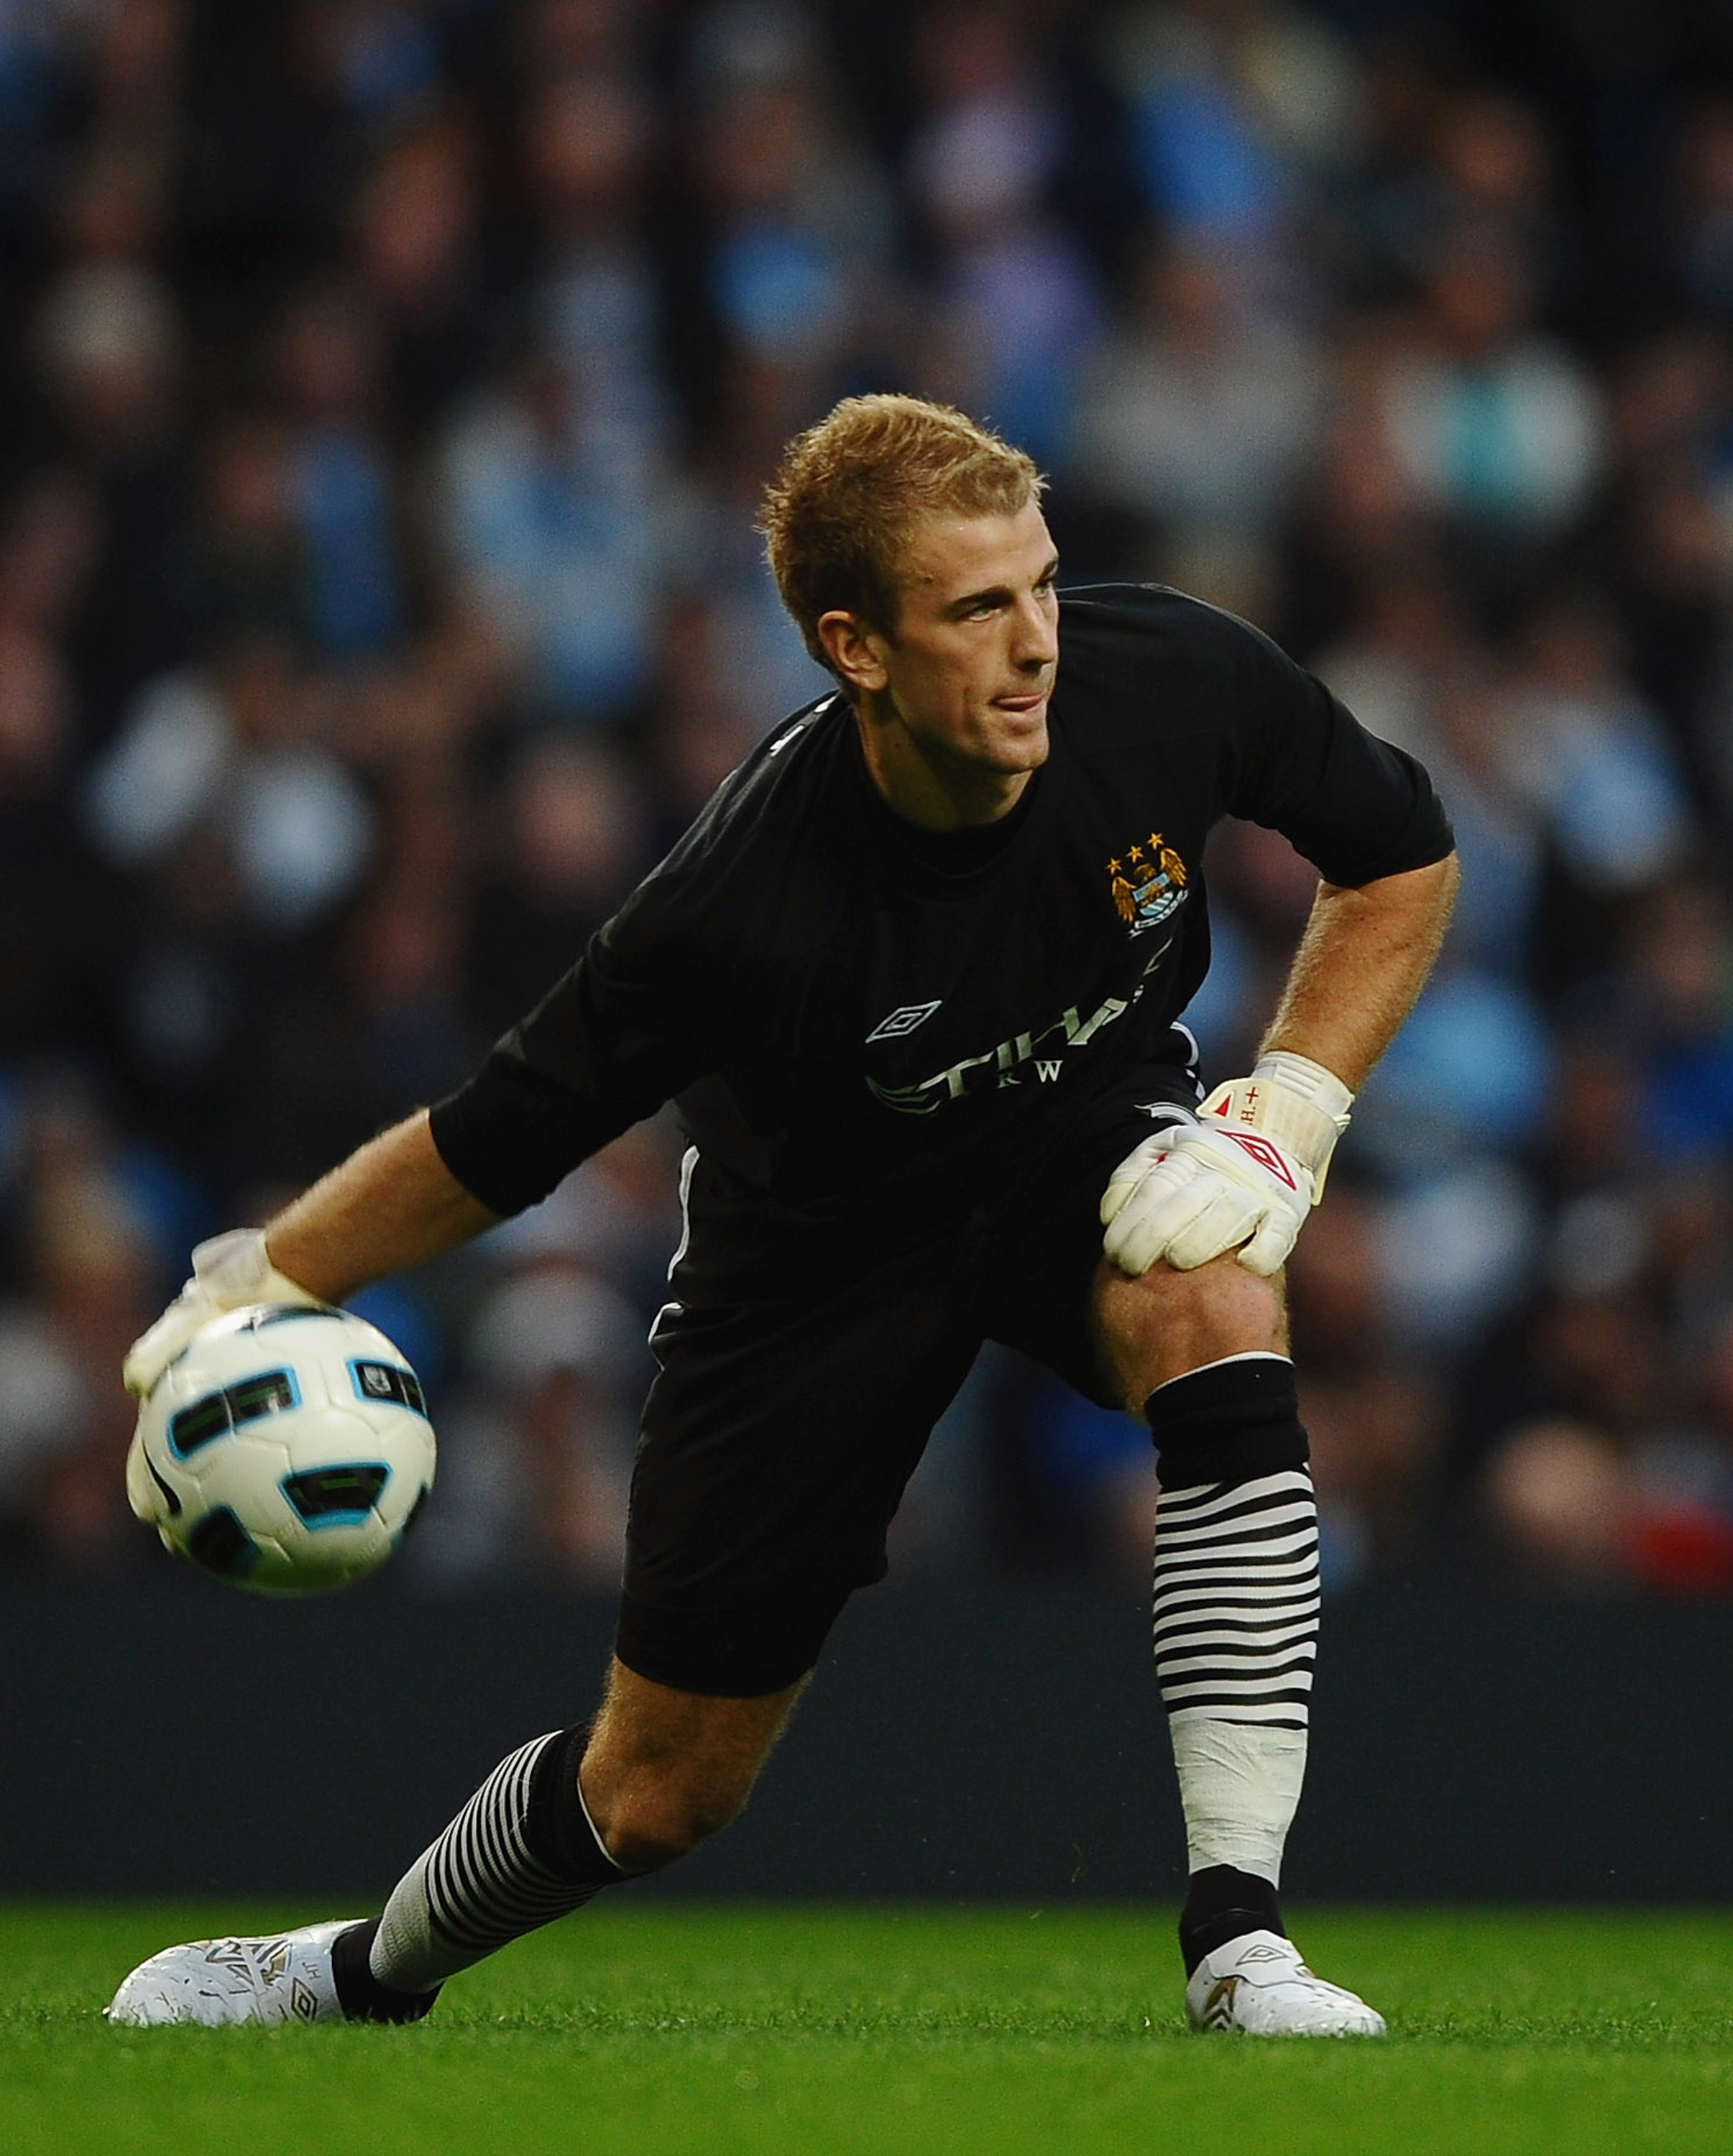 MANCHESTER, ENGLAND - AUGUST 23:  Joe Hart of Manchester City in action during the Barclays Premier League match between Manchester City and Liverpool at City of Manchester Stadium on August 23, 2010 in Manchester, England.  (Photo by Laurence Griffiths/G